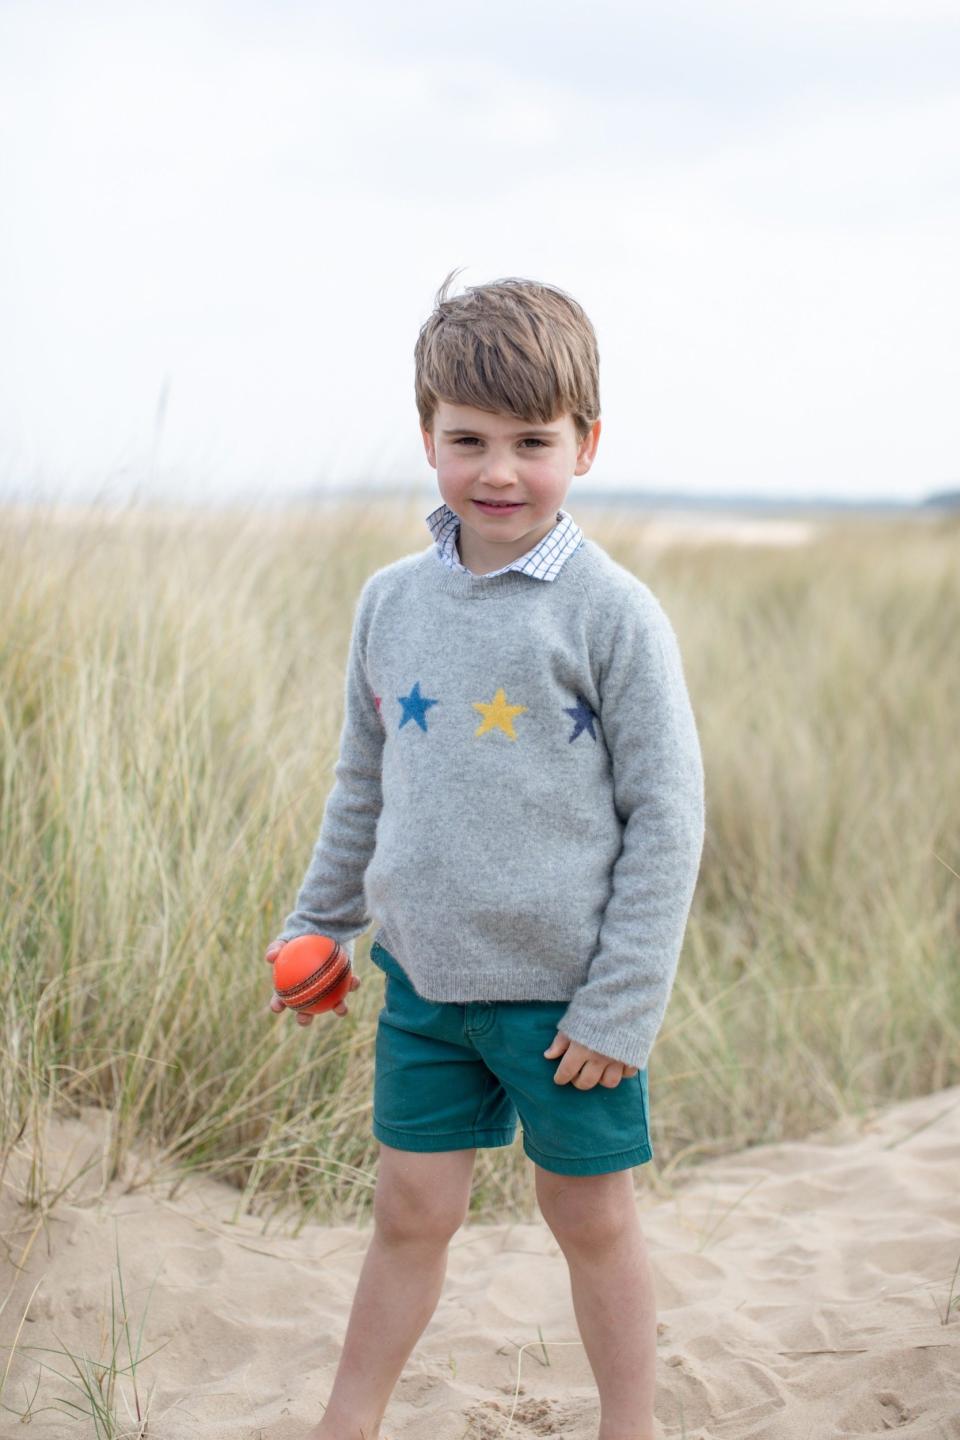 The photoshoot took place on the coast in Norfolk - The Duchess of Cambridge